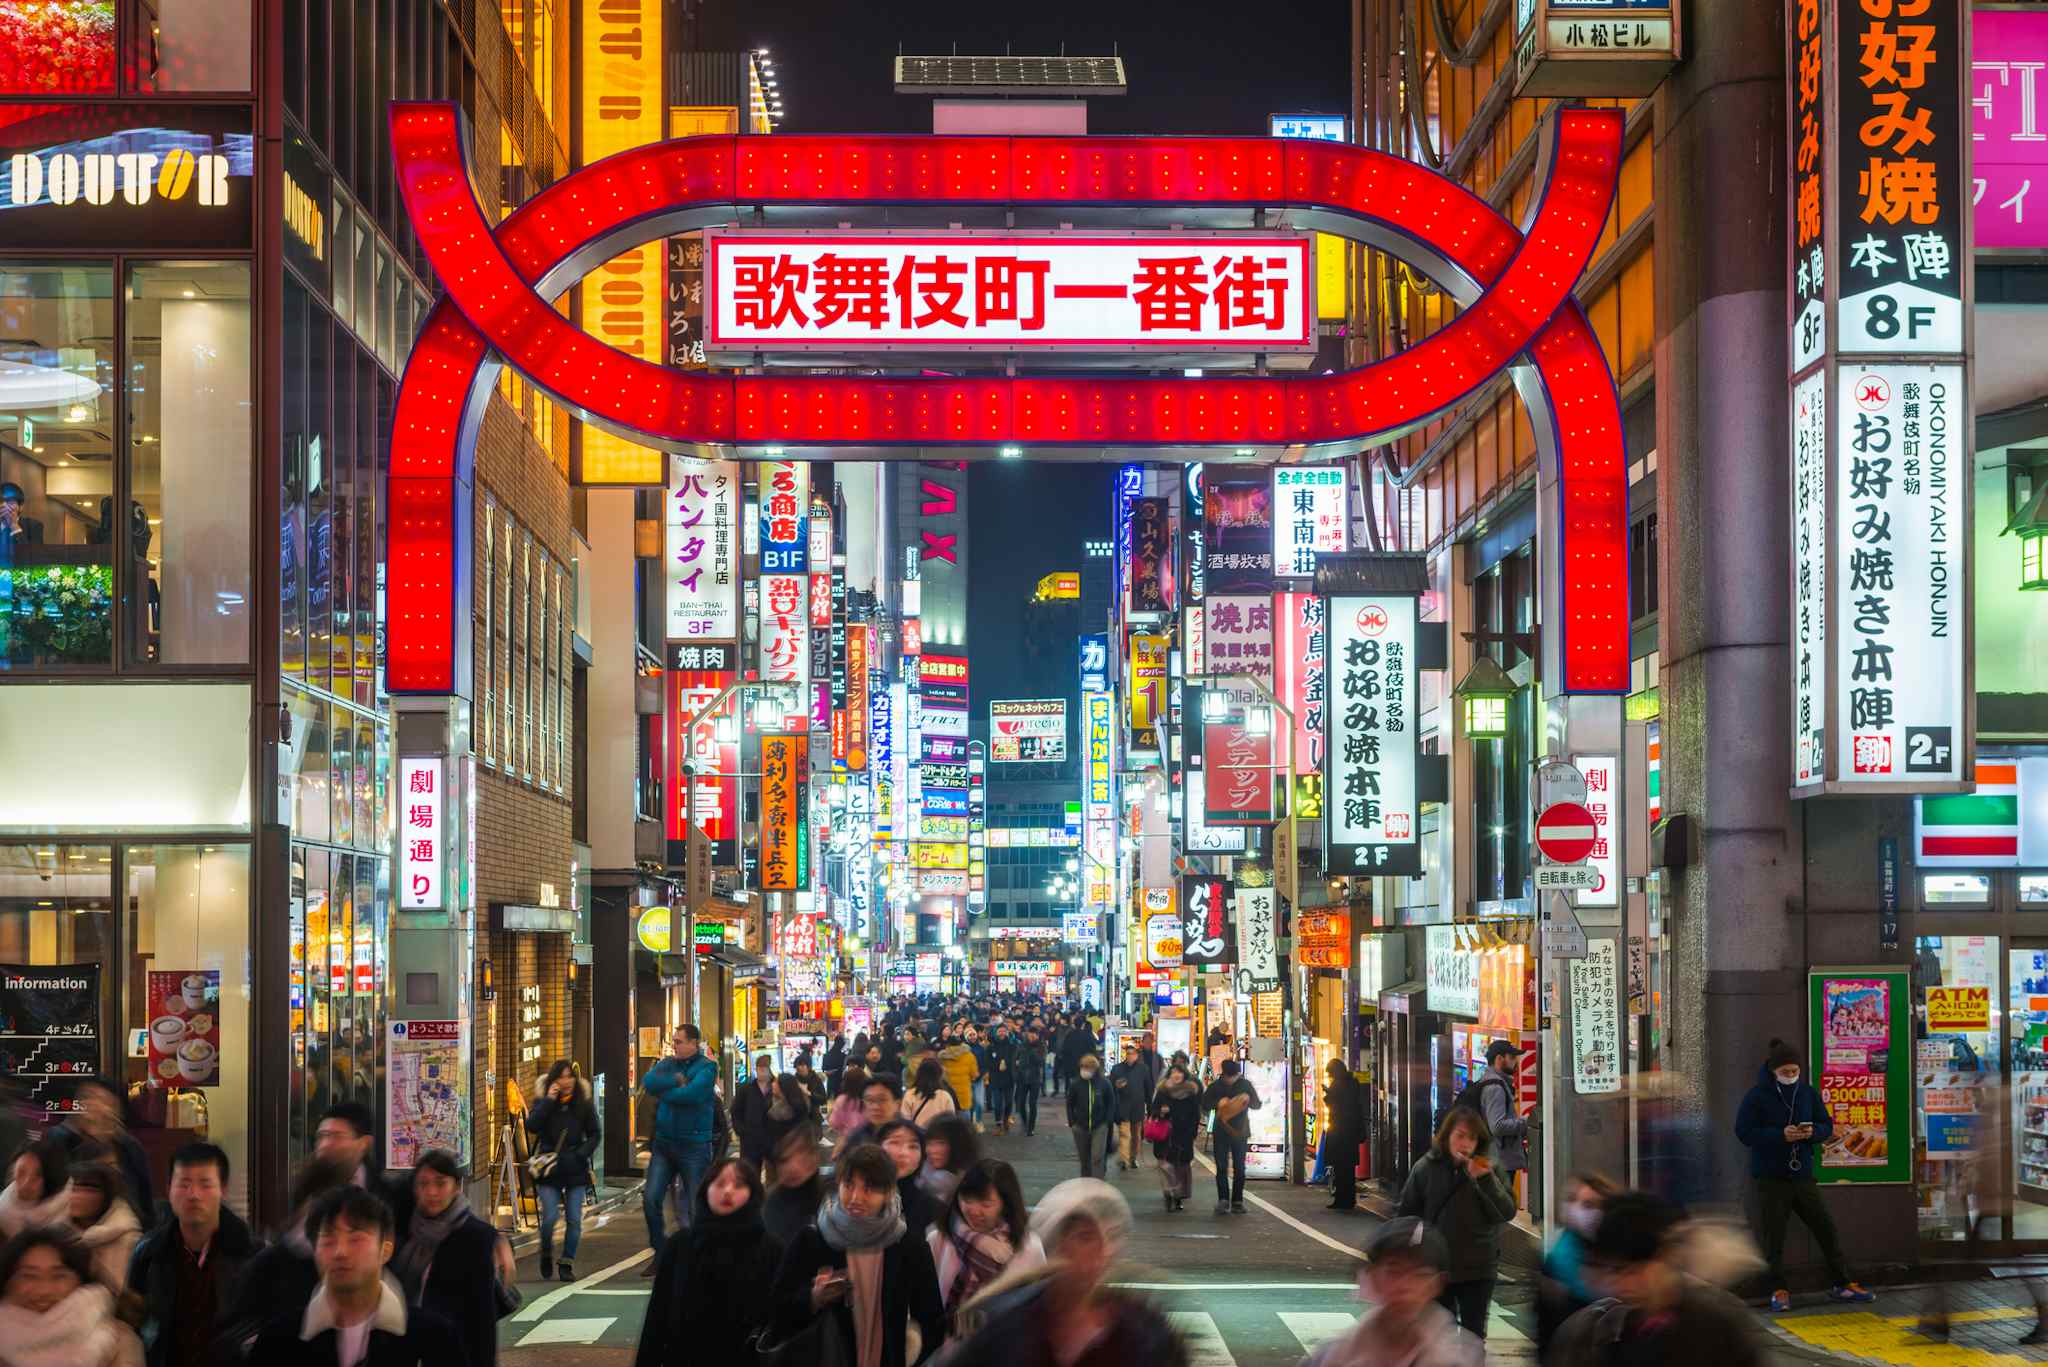 Neon lights and illuminated billboards of Shinjuku glittering at night above crowds of shoppers in the heart of Tokyo, Japan’s vibrant capital city. Photo: GettyImages-1423282990